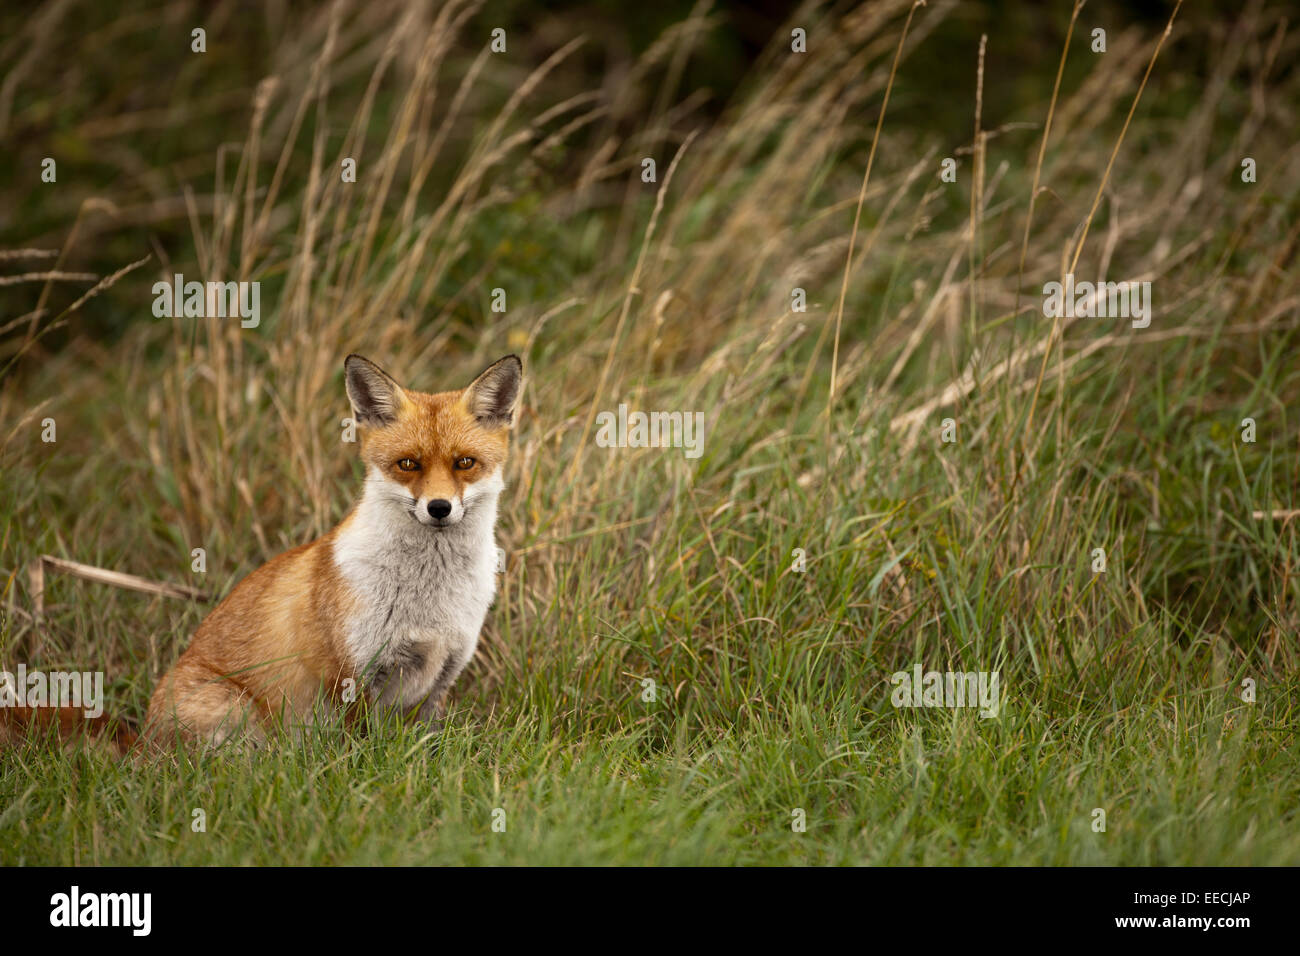 are foxes scavengers